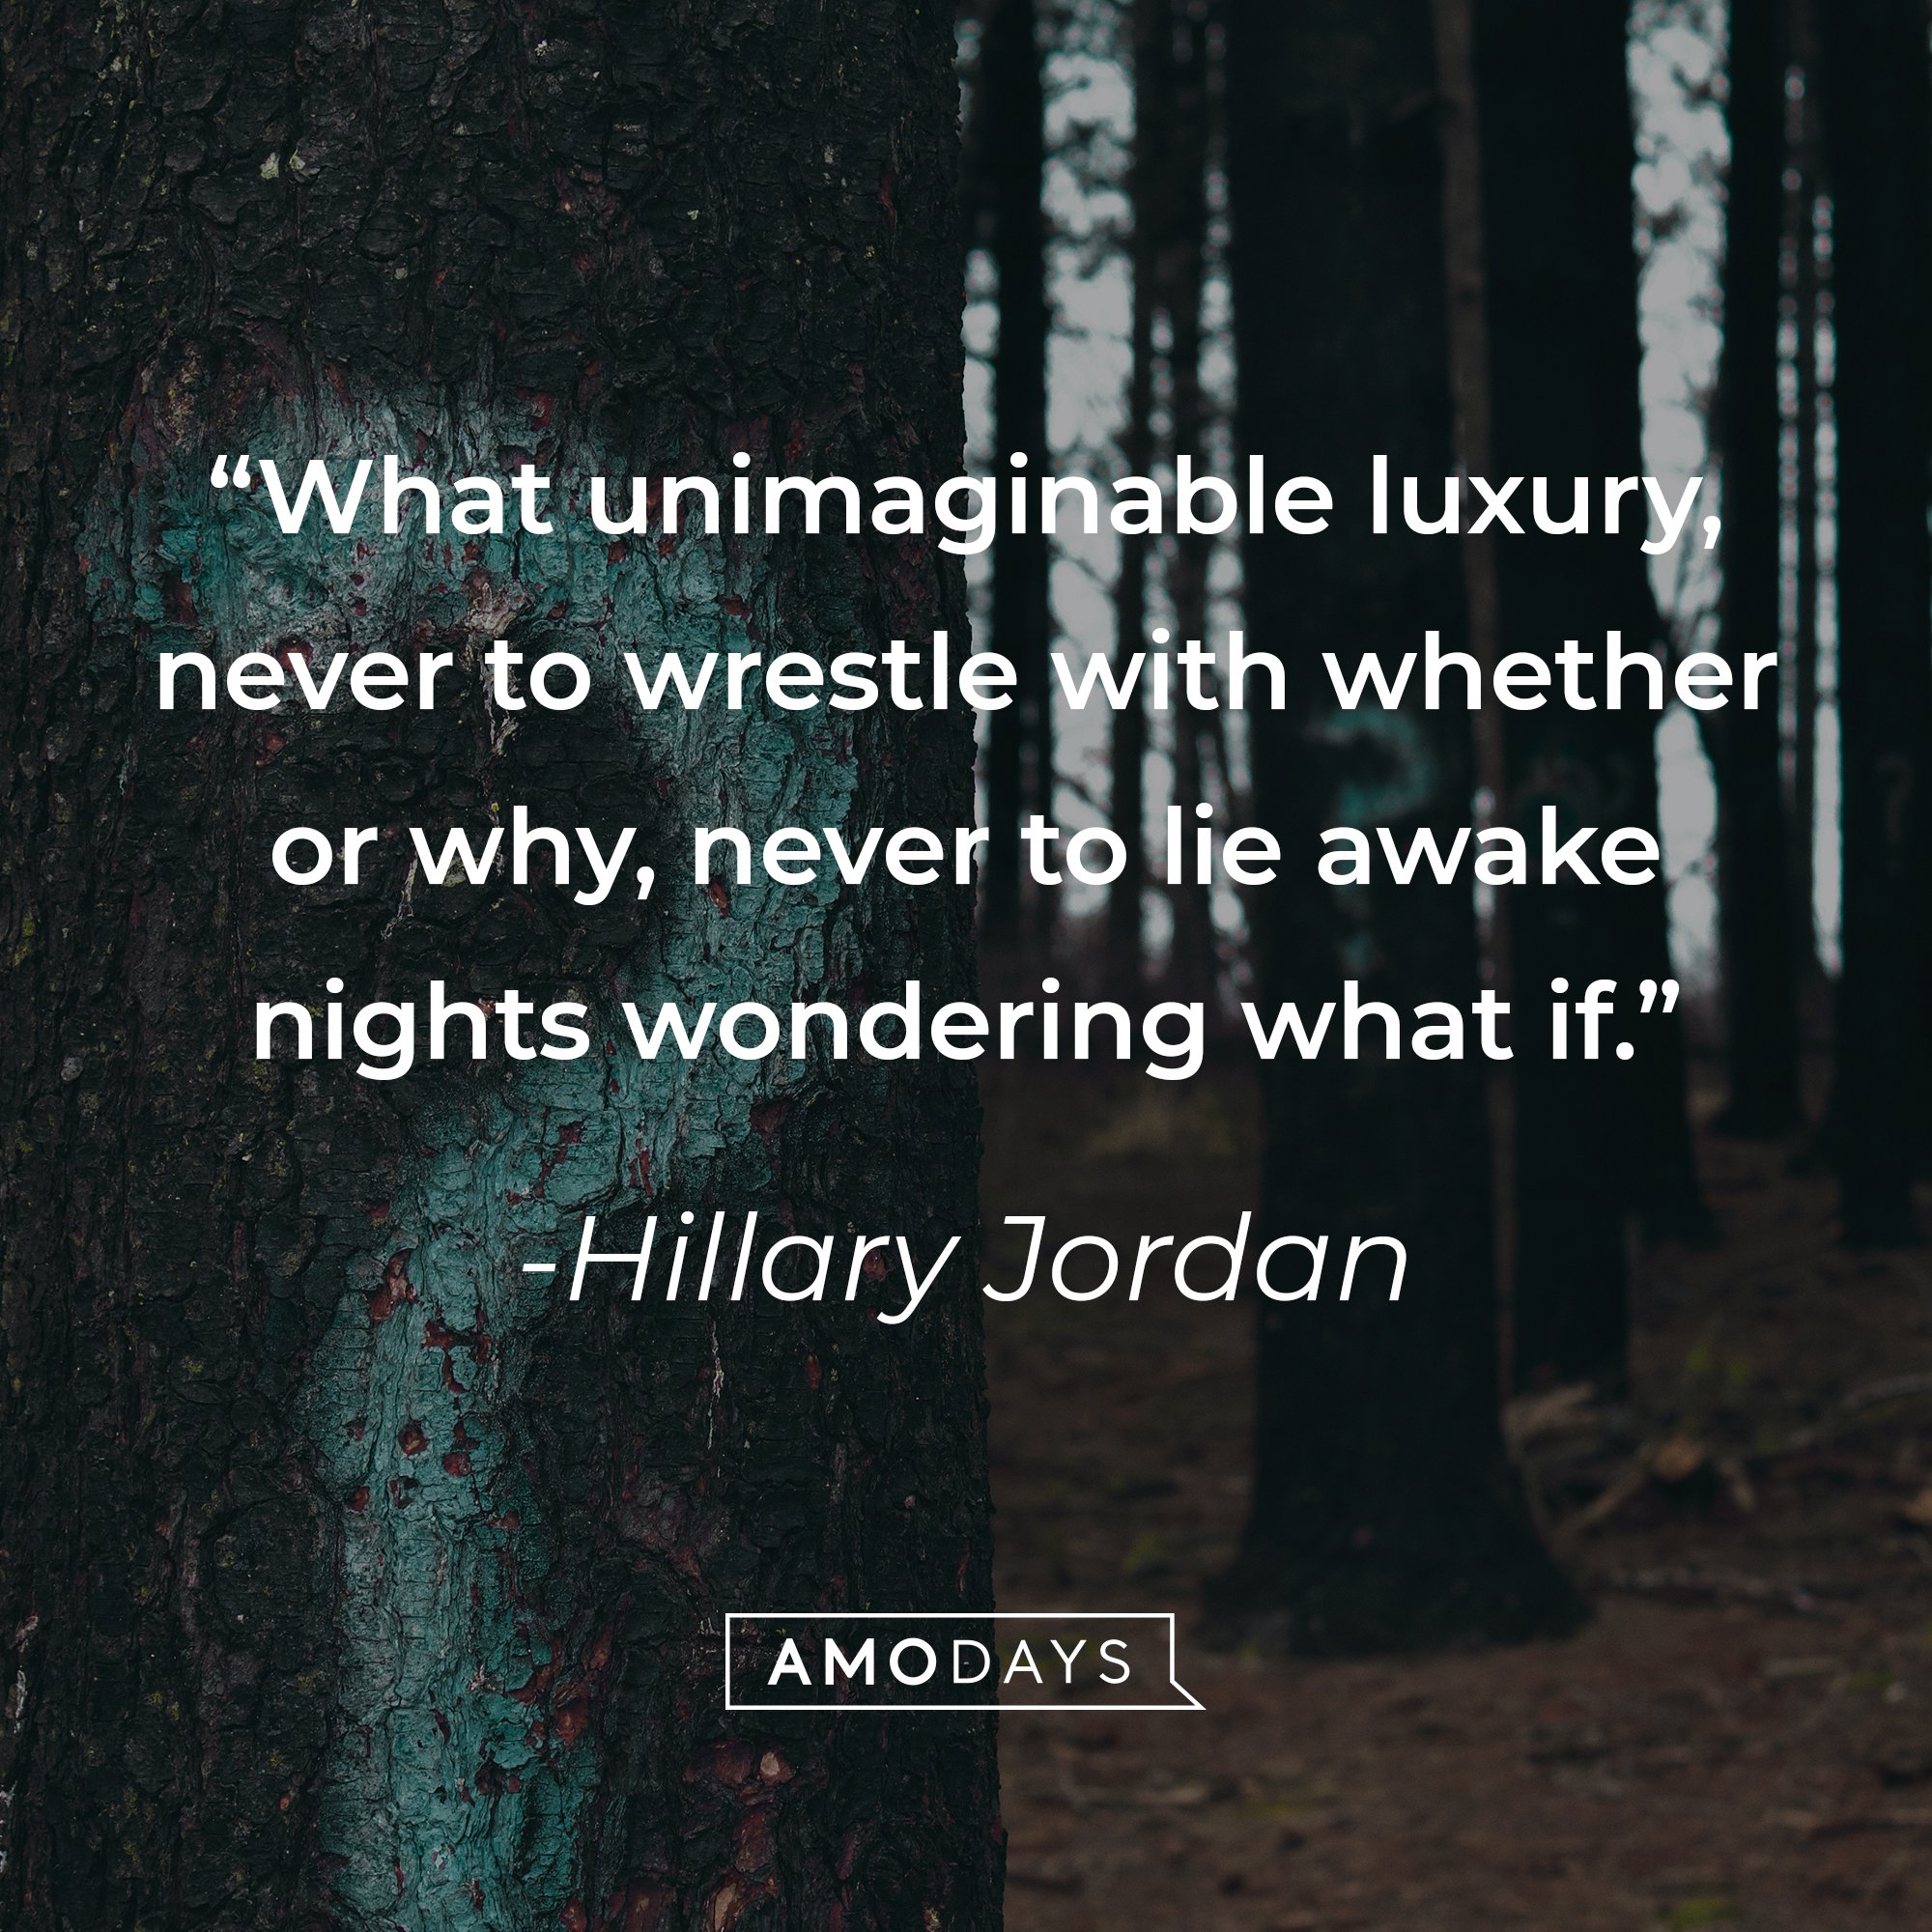 Hillary Jordan's quote: "What unimaginable luxury, never to wrestle with whether or why, never to lie awake nights wondering what if." | Image: AmoDays